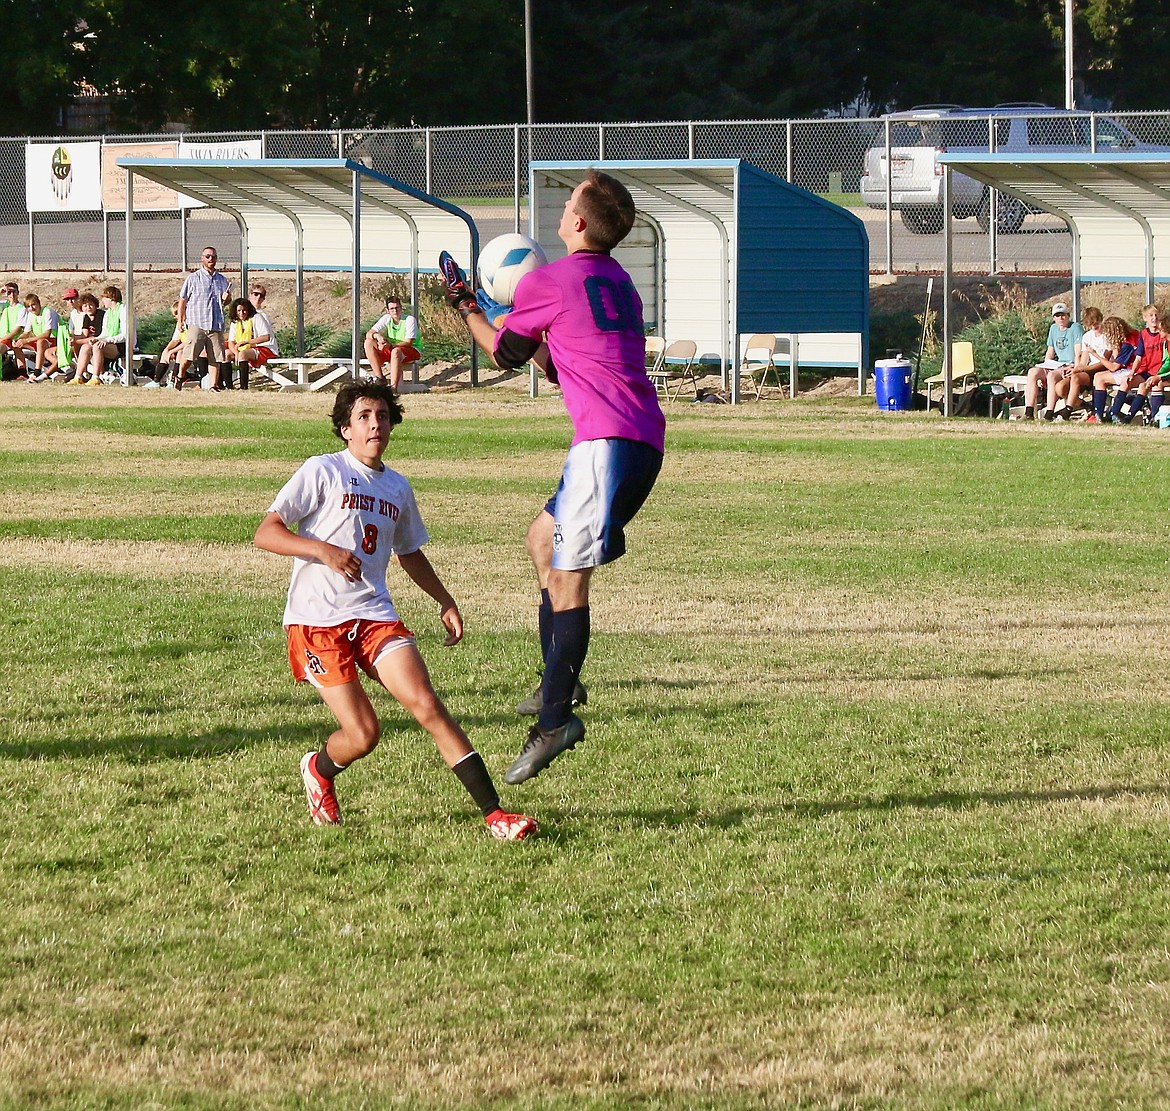 Goalkeeper Roger Naylor protects the goal against Priest River.